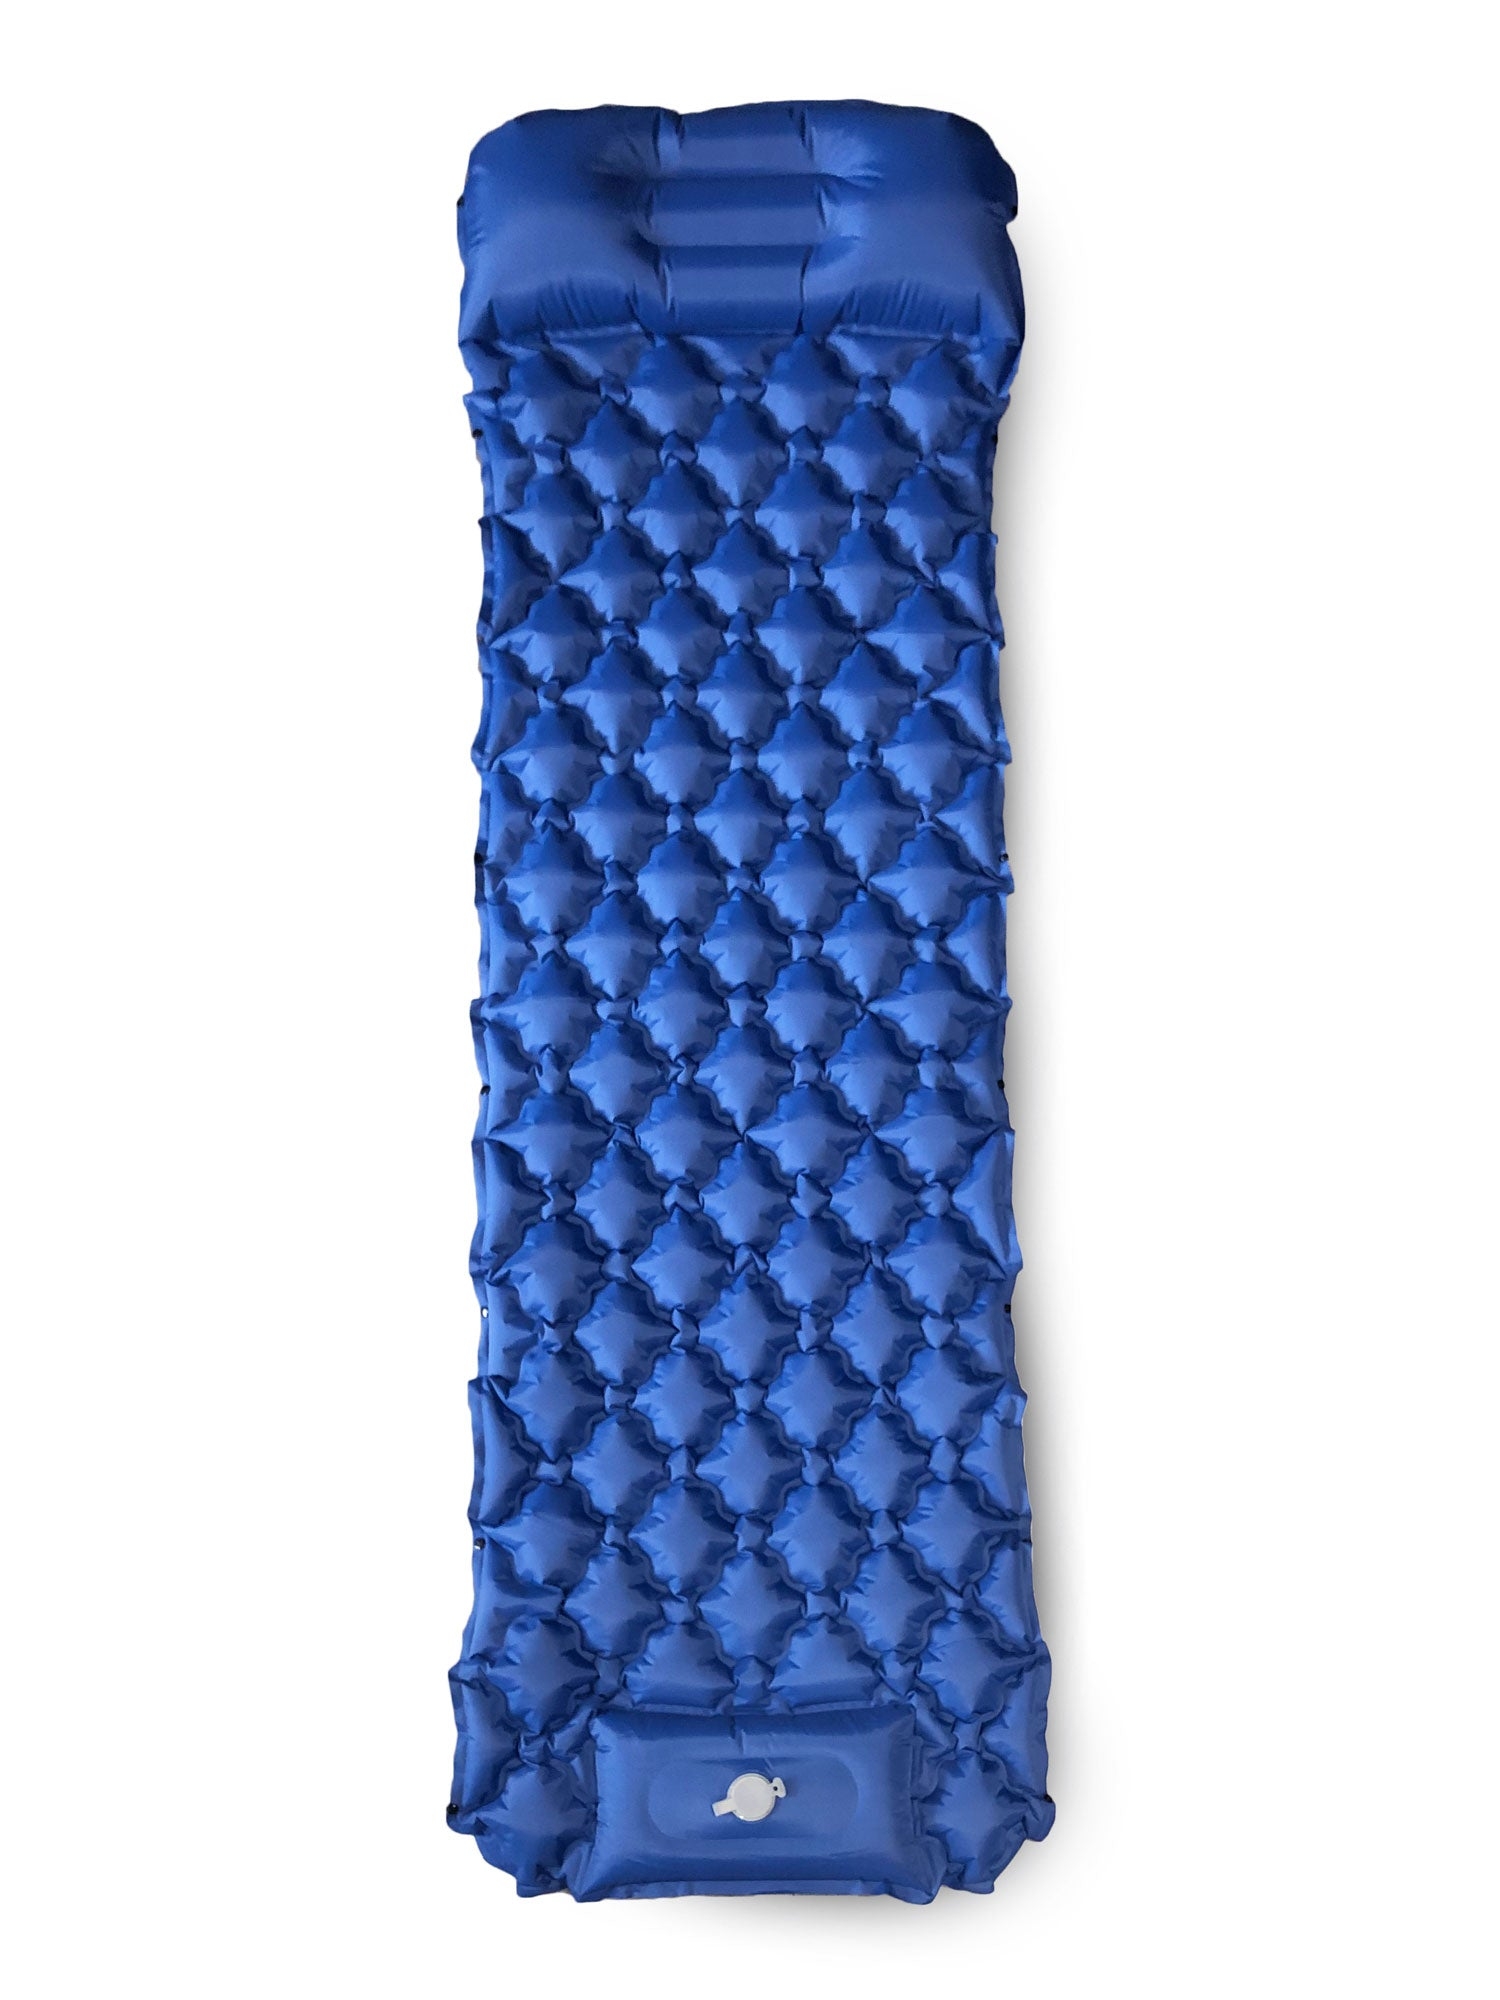 Bspoiled Inflatable Camping Mat Single – Navy Blue – BSpoiled